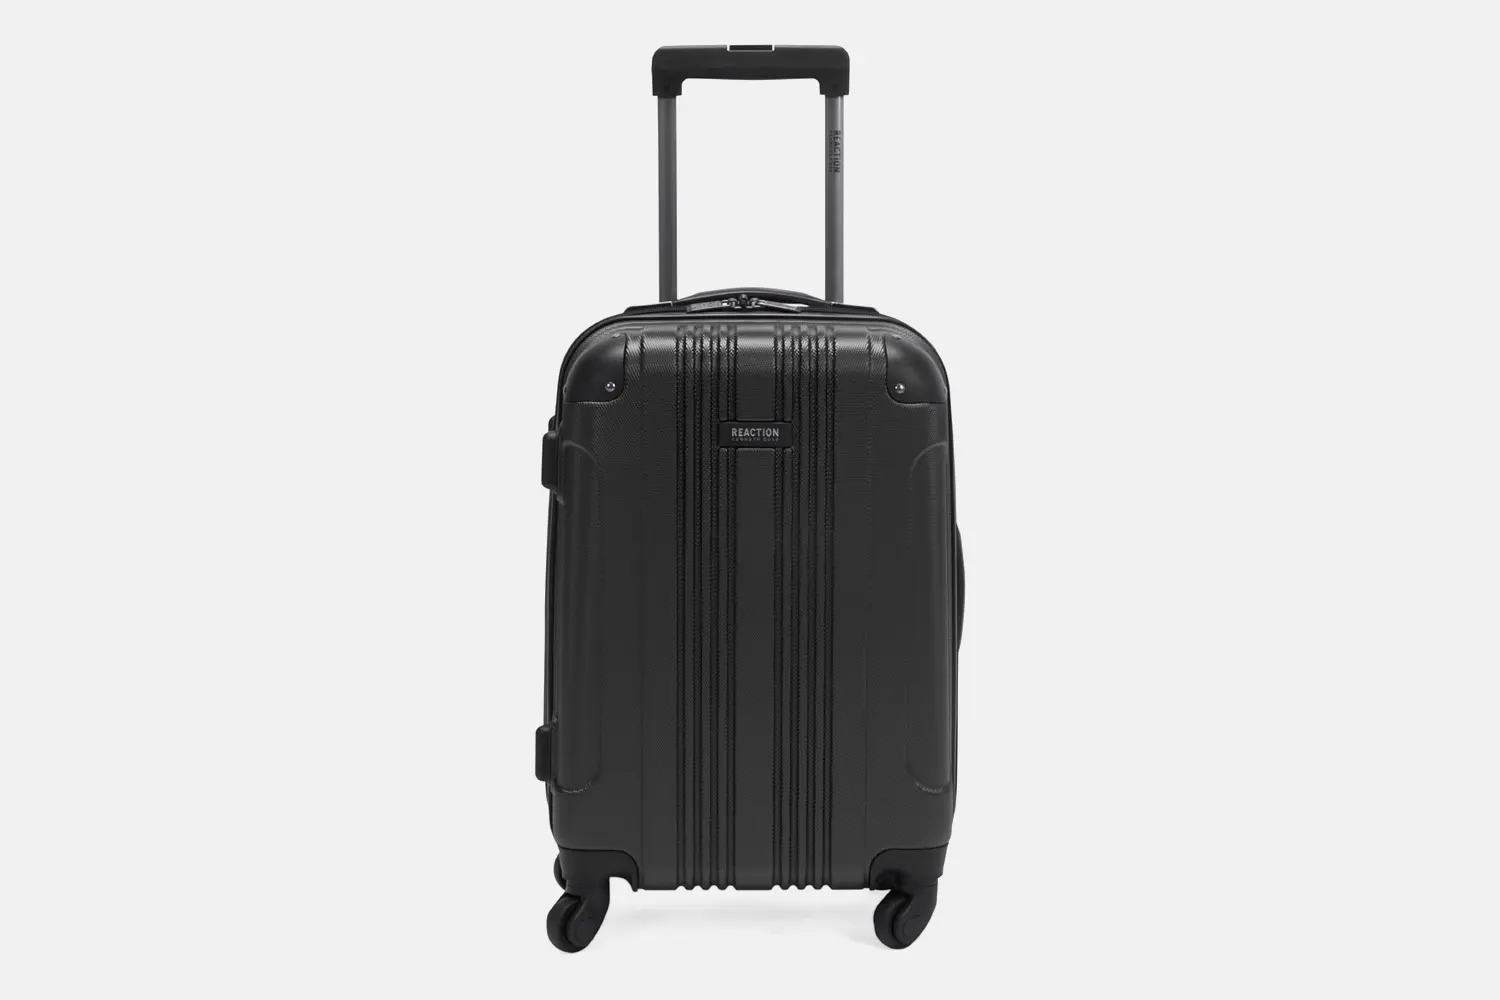 Kenneth Cole Reaction Out of Bounds Carry-on Luggage